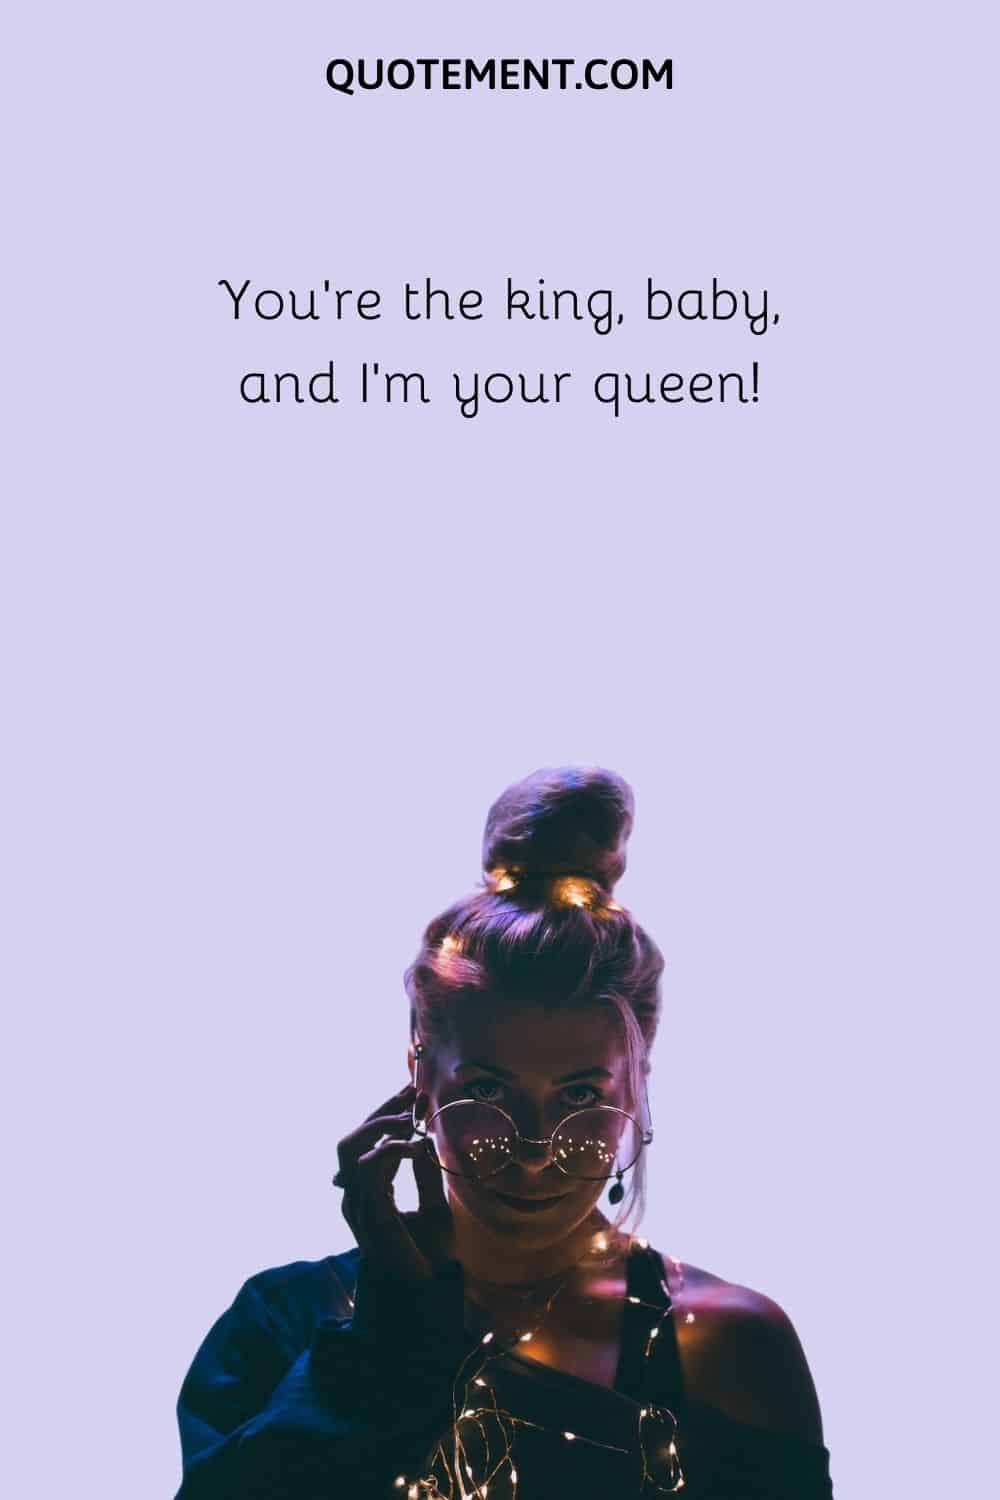 You’re the king, baby, and I’m your queen